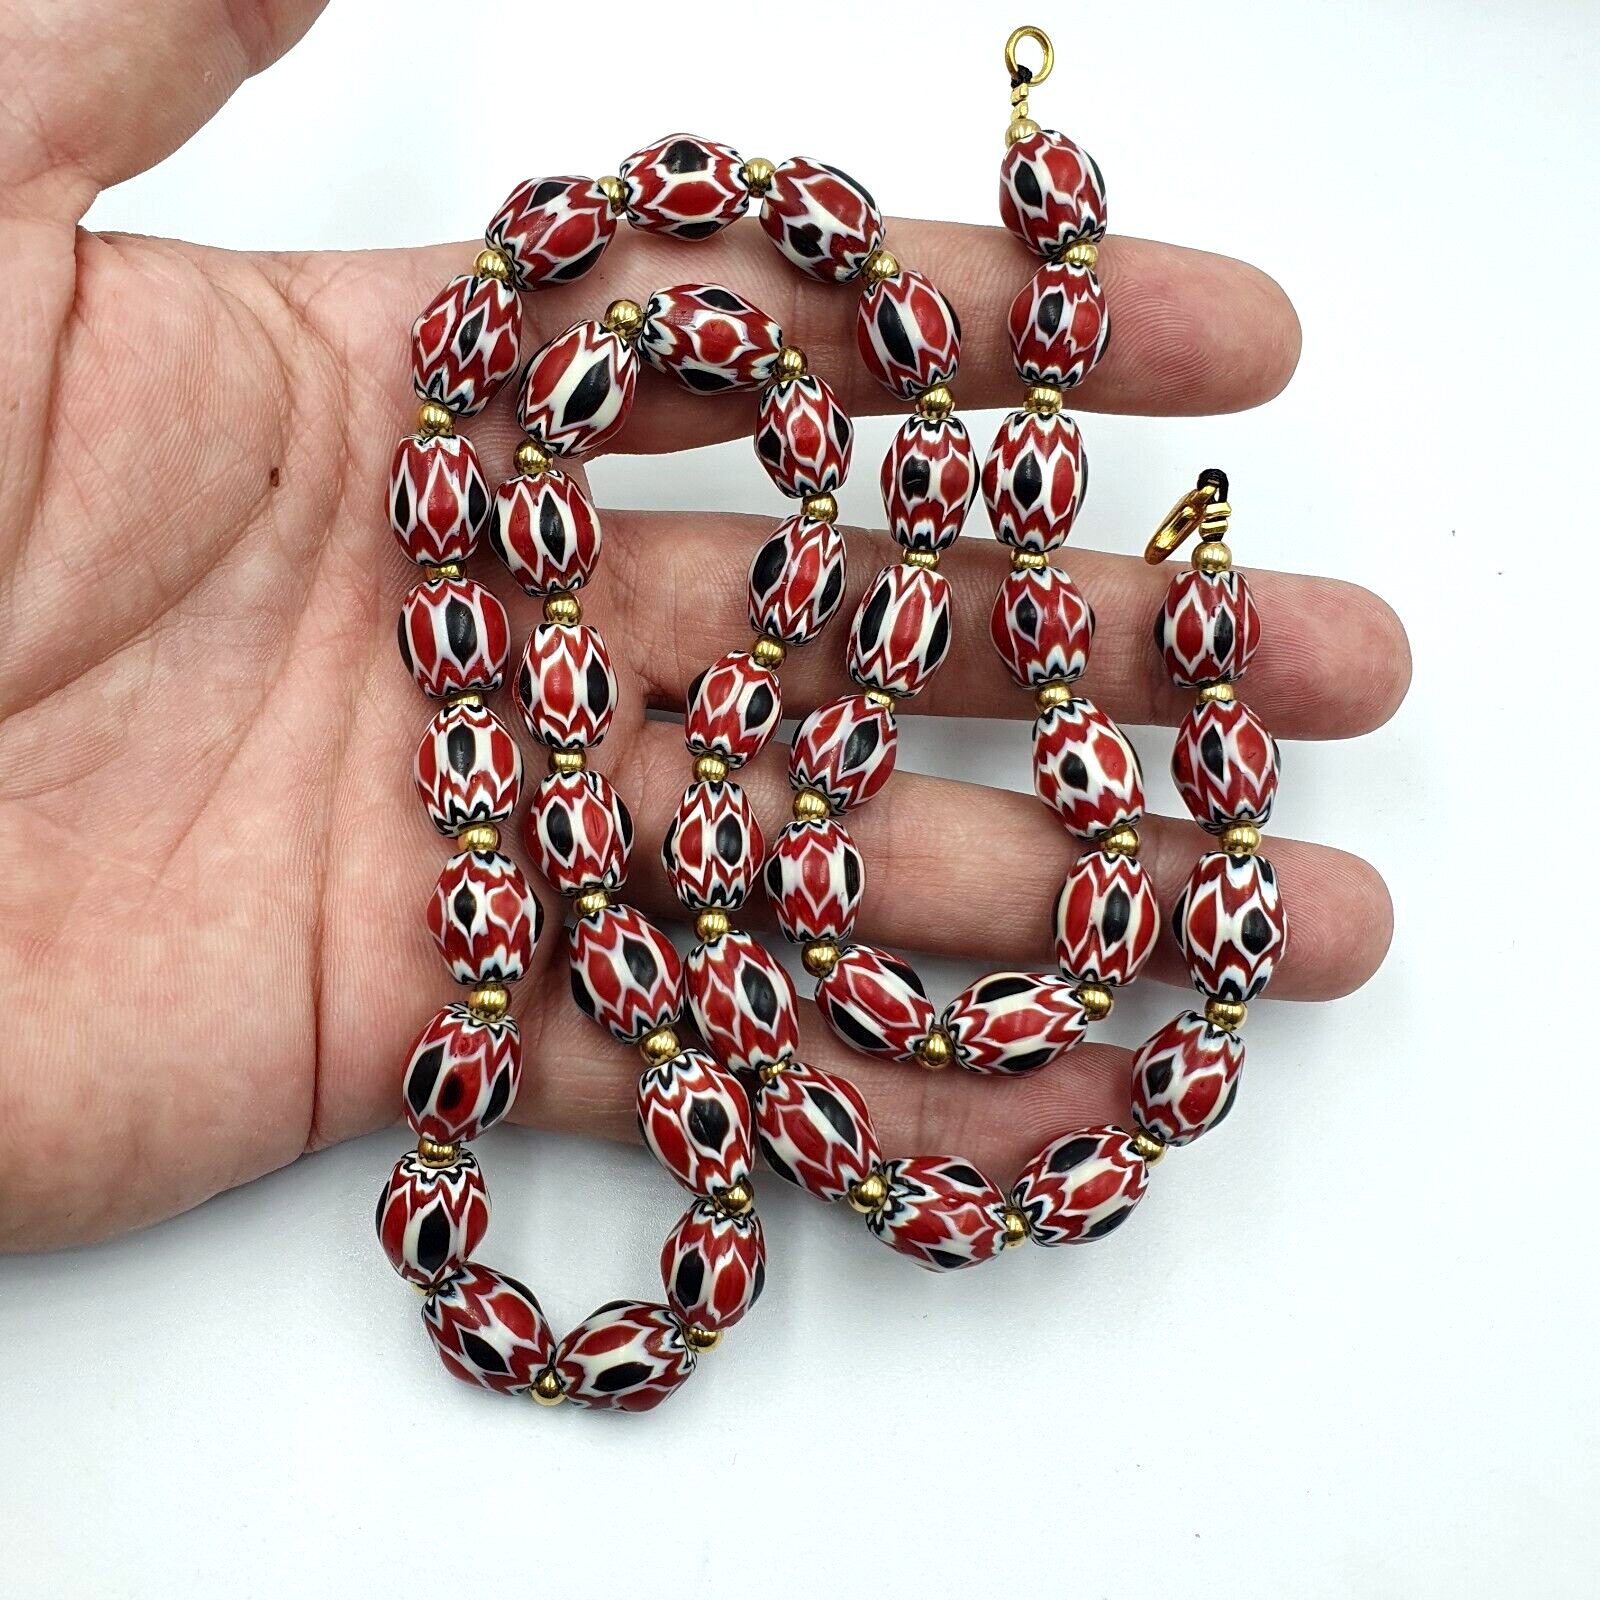 Vintage Venetian Trade Style beads Old Red Chevron Beads Strand